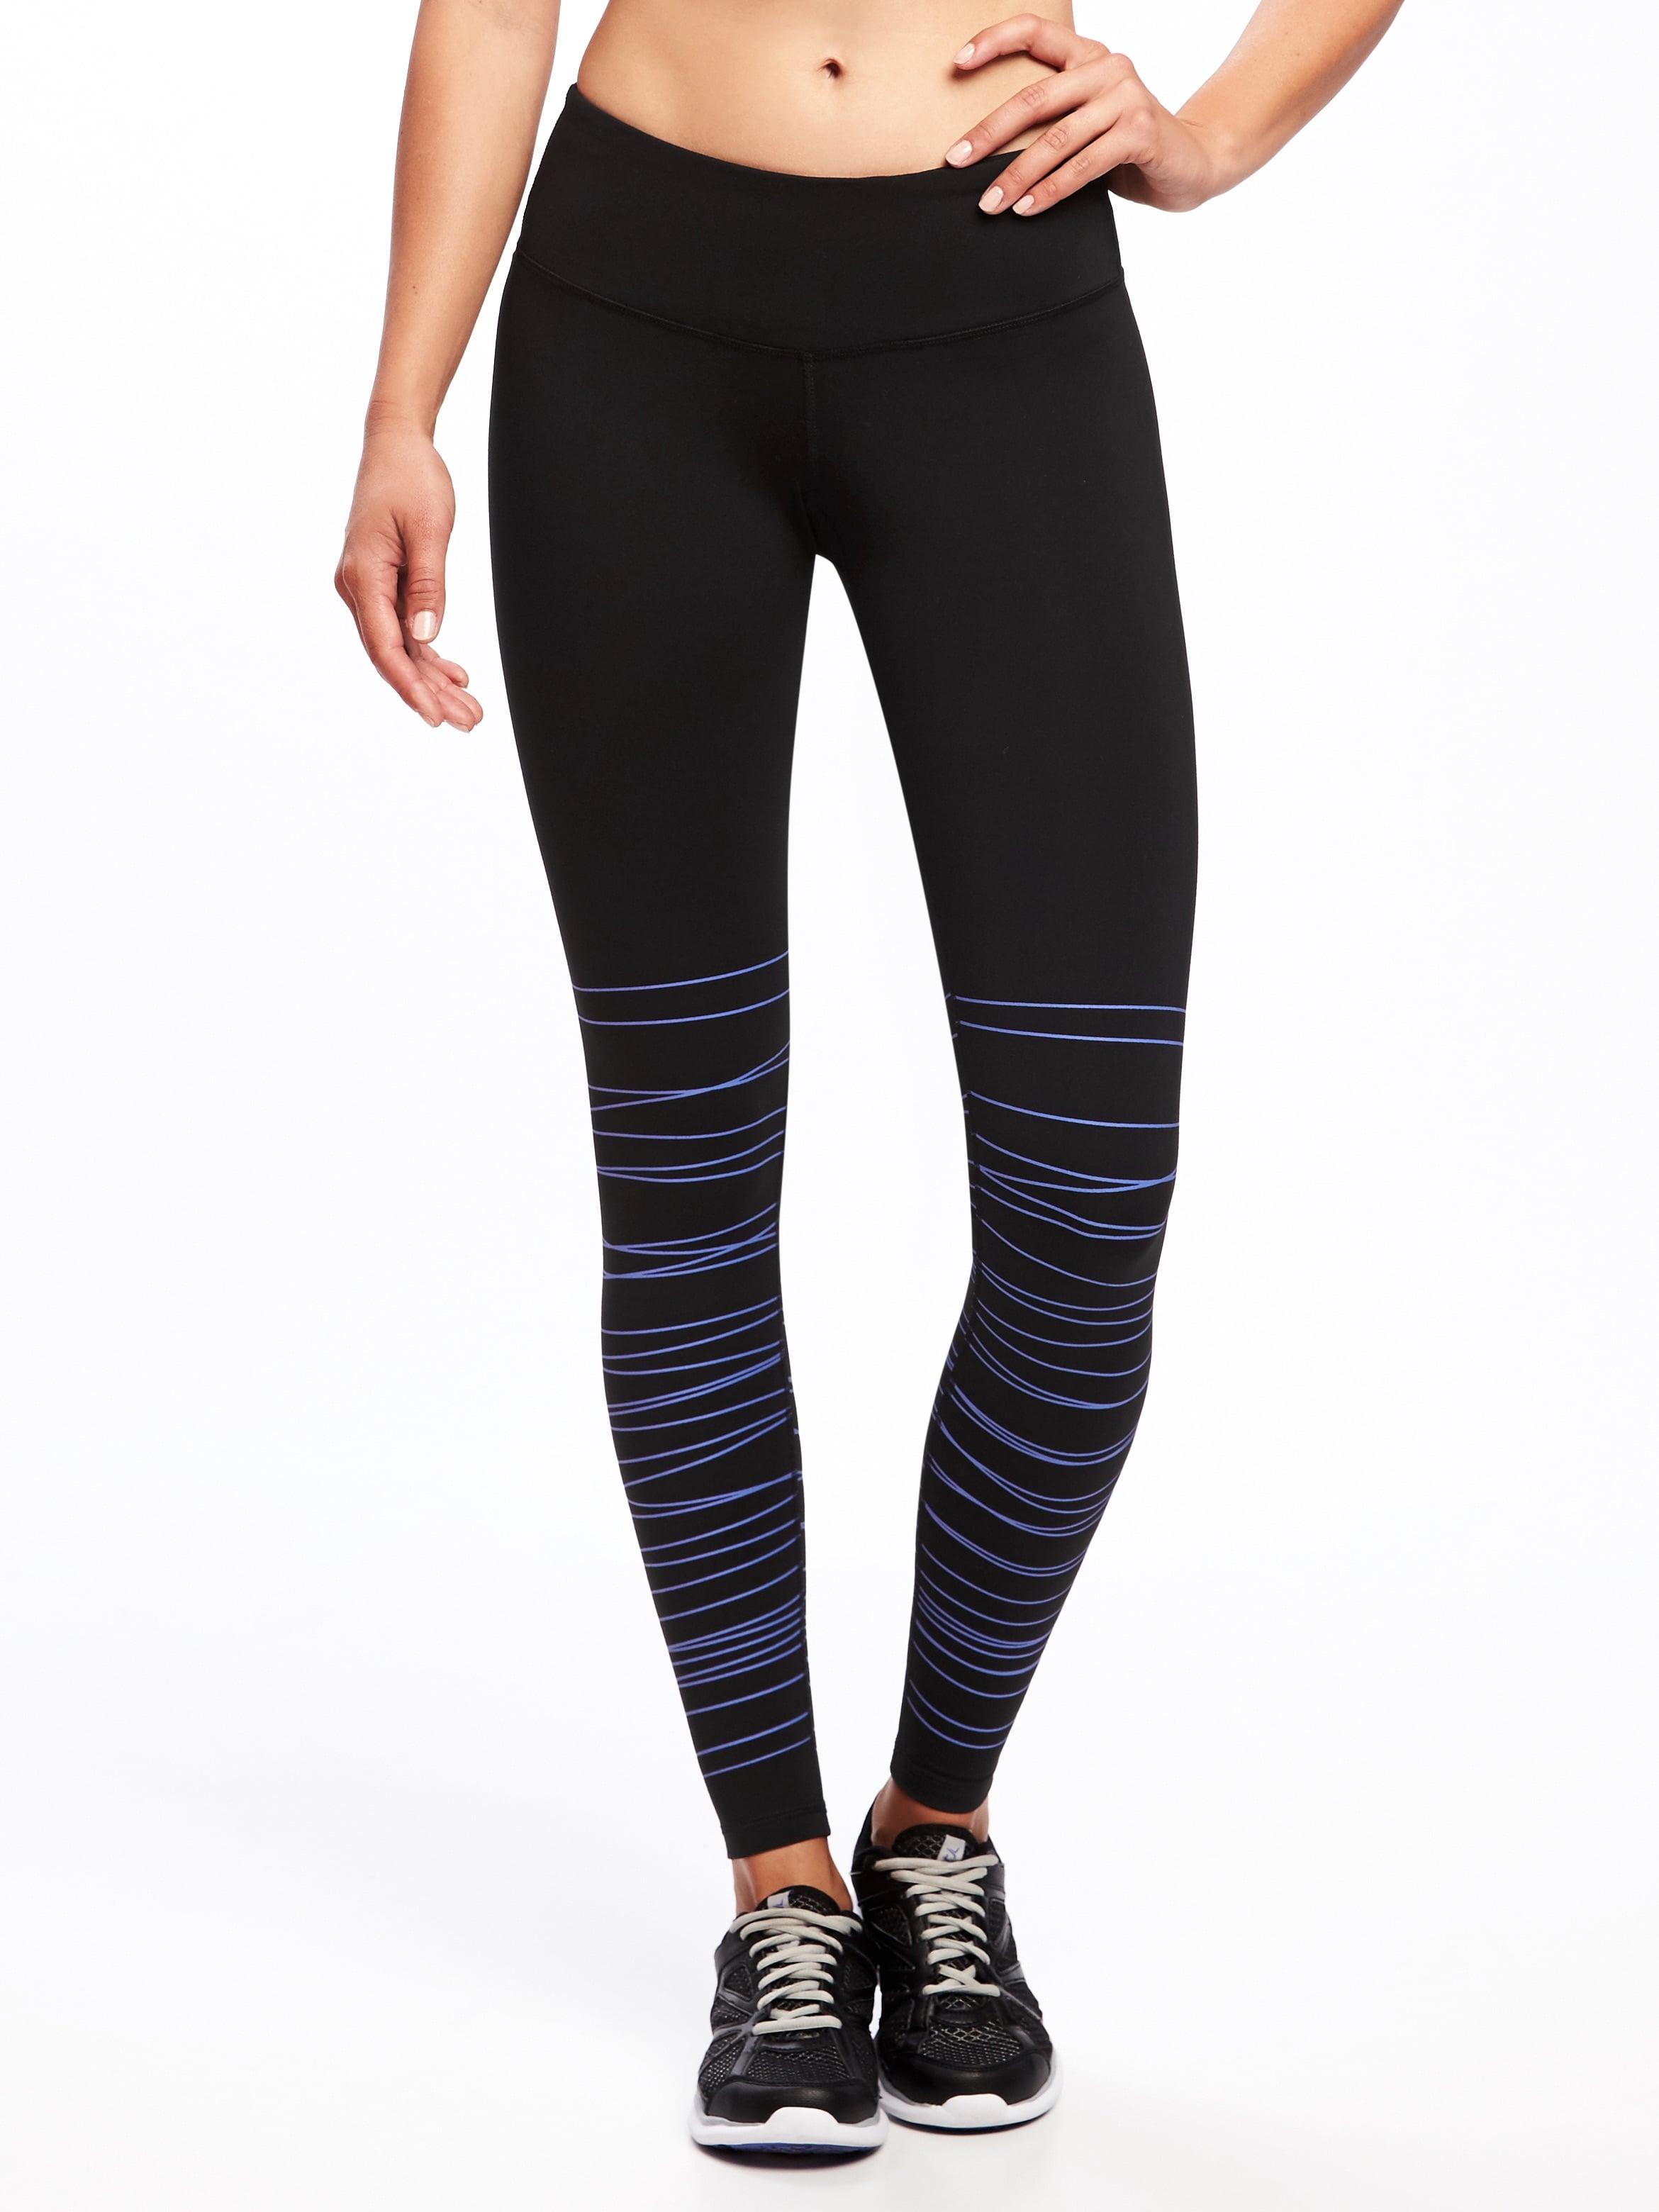 Unknown Places to Buy Workout Clothes